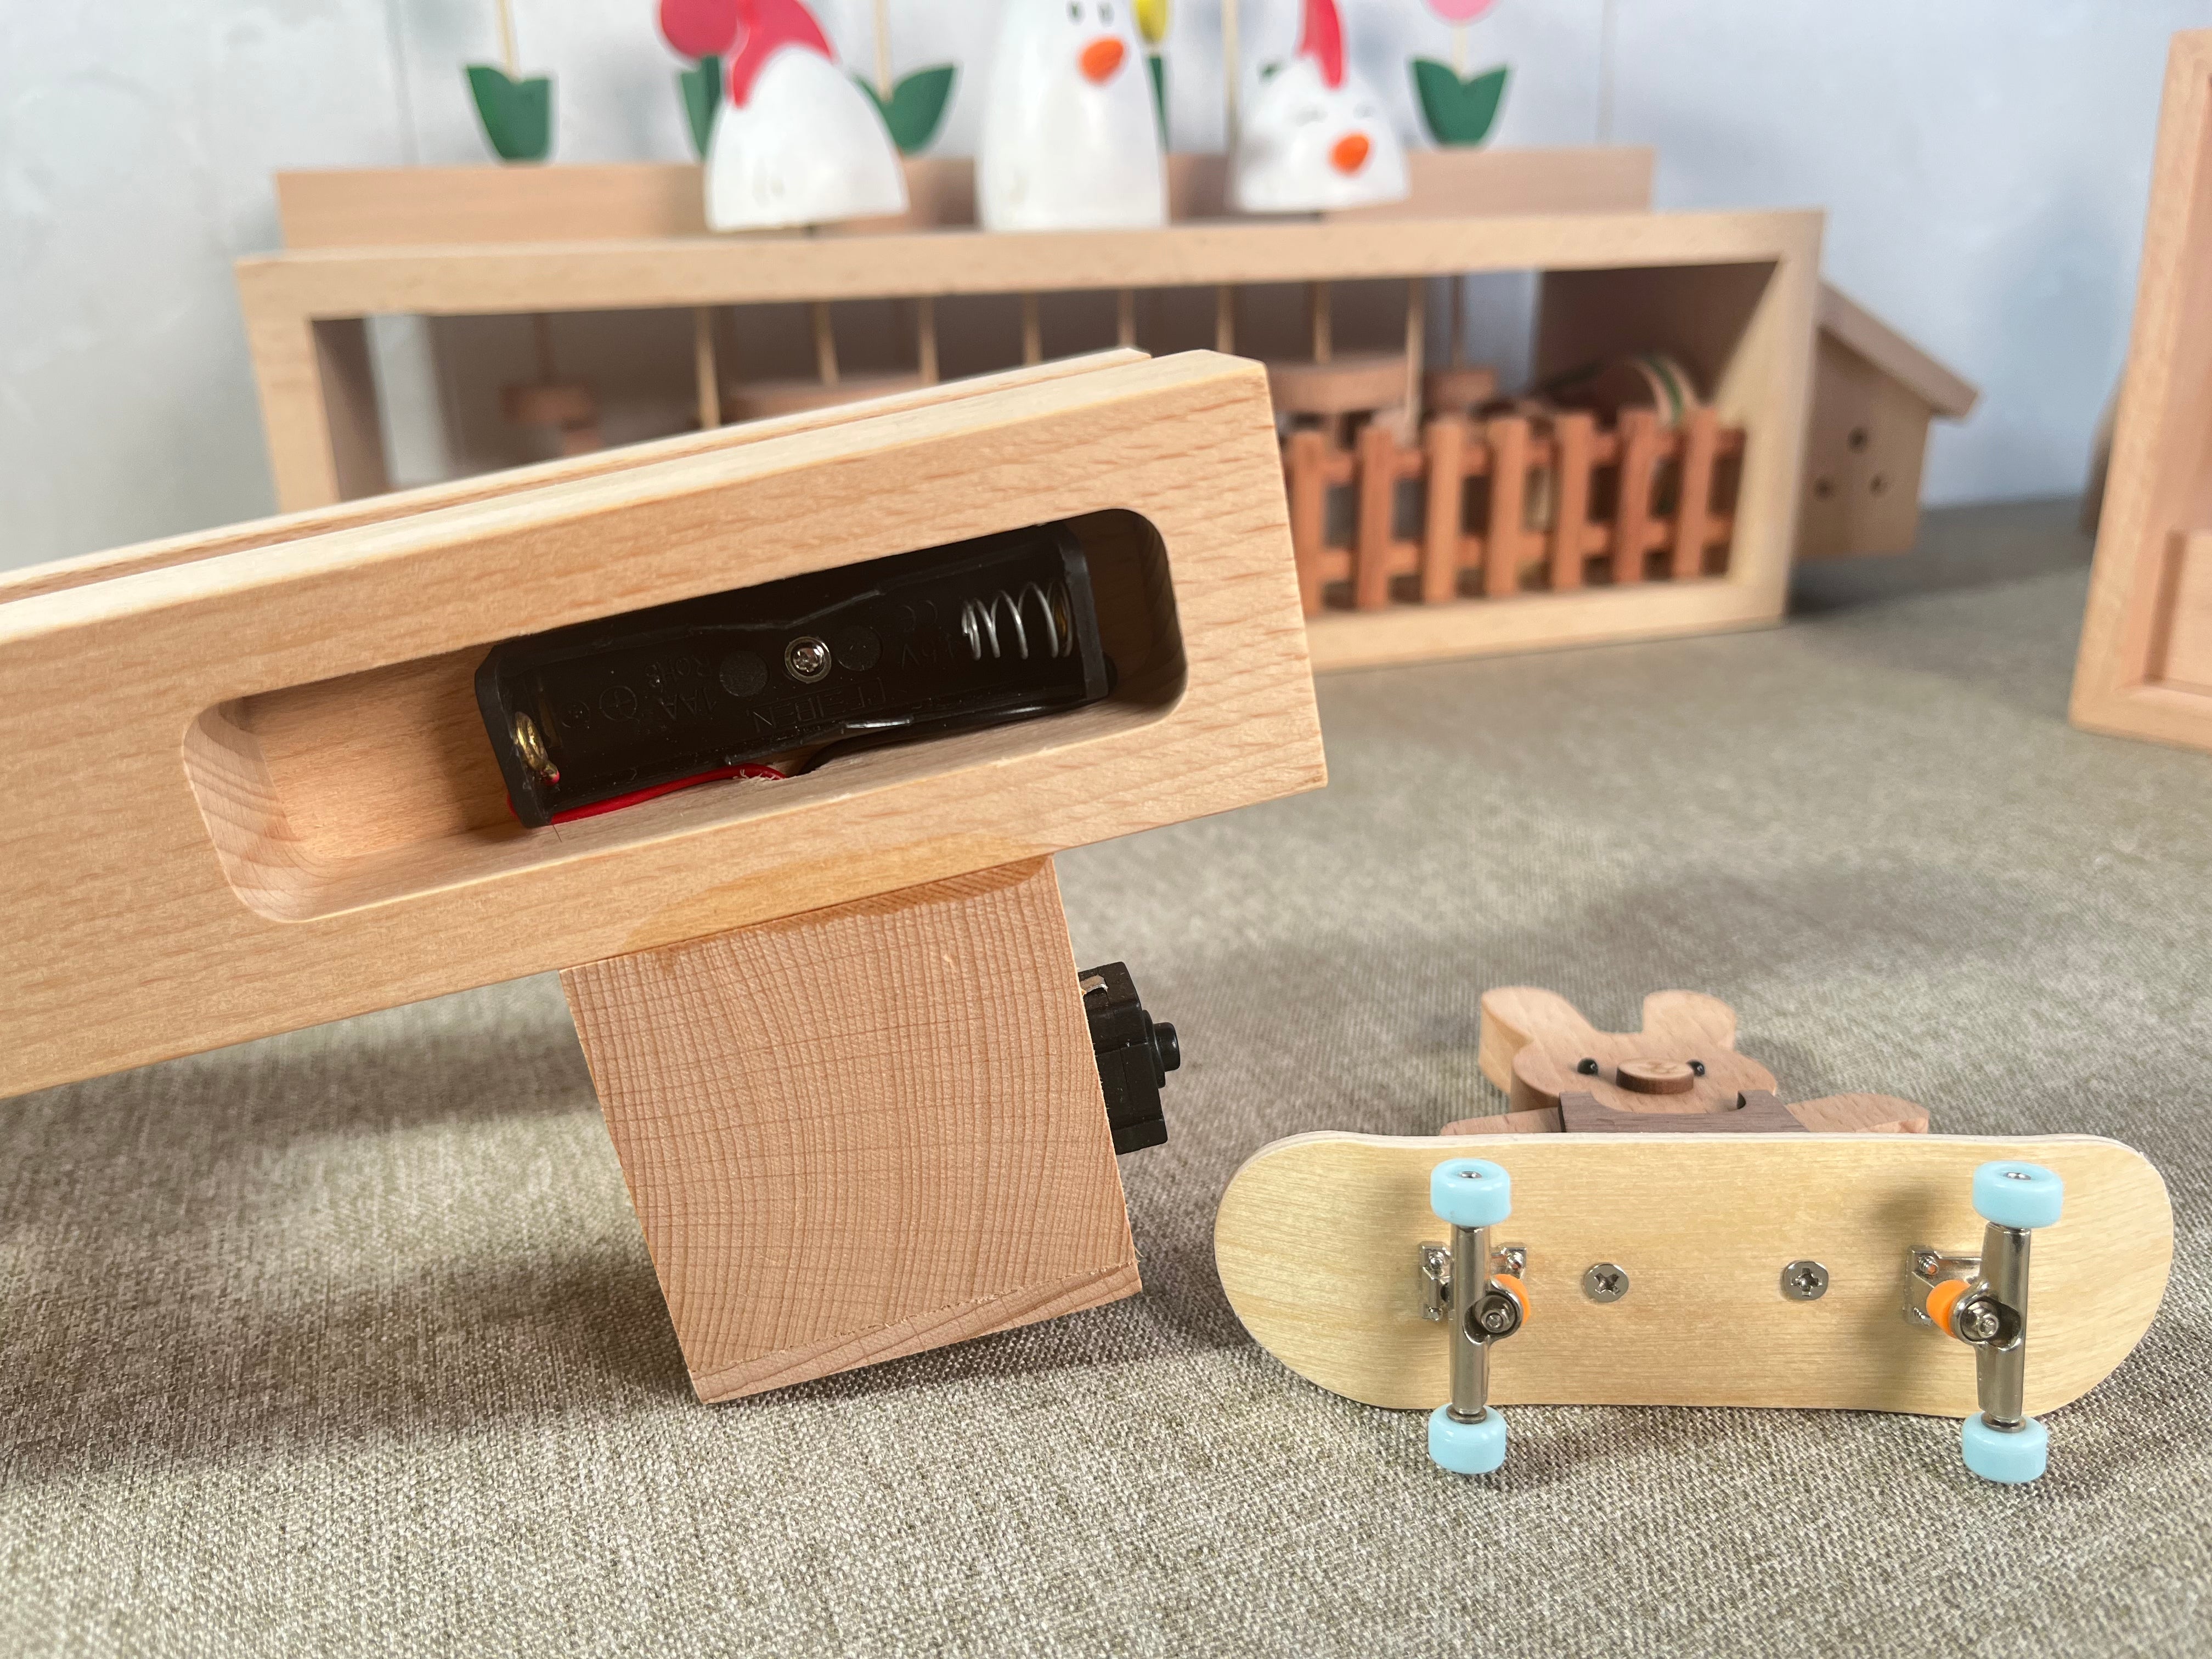 Handcrafted Wooden Mechanical Games with a Rabbit on a Skateboard - Mike Uncle